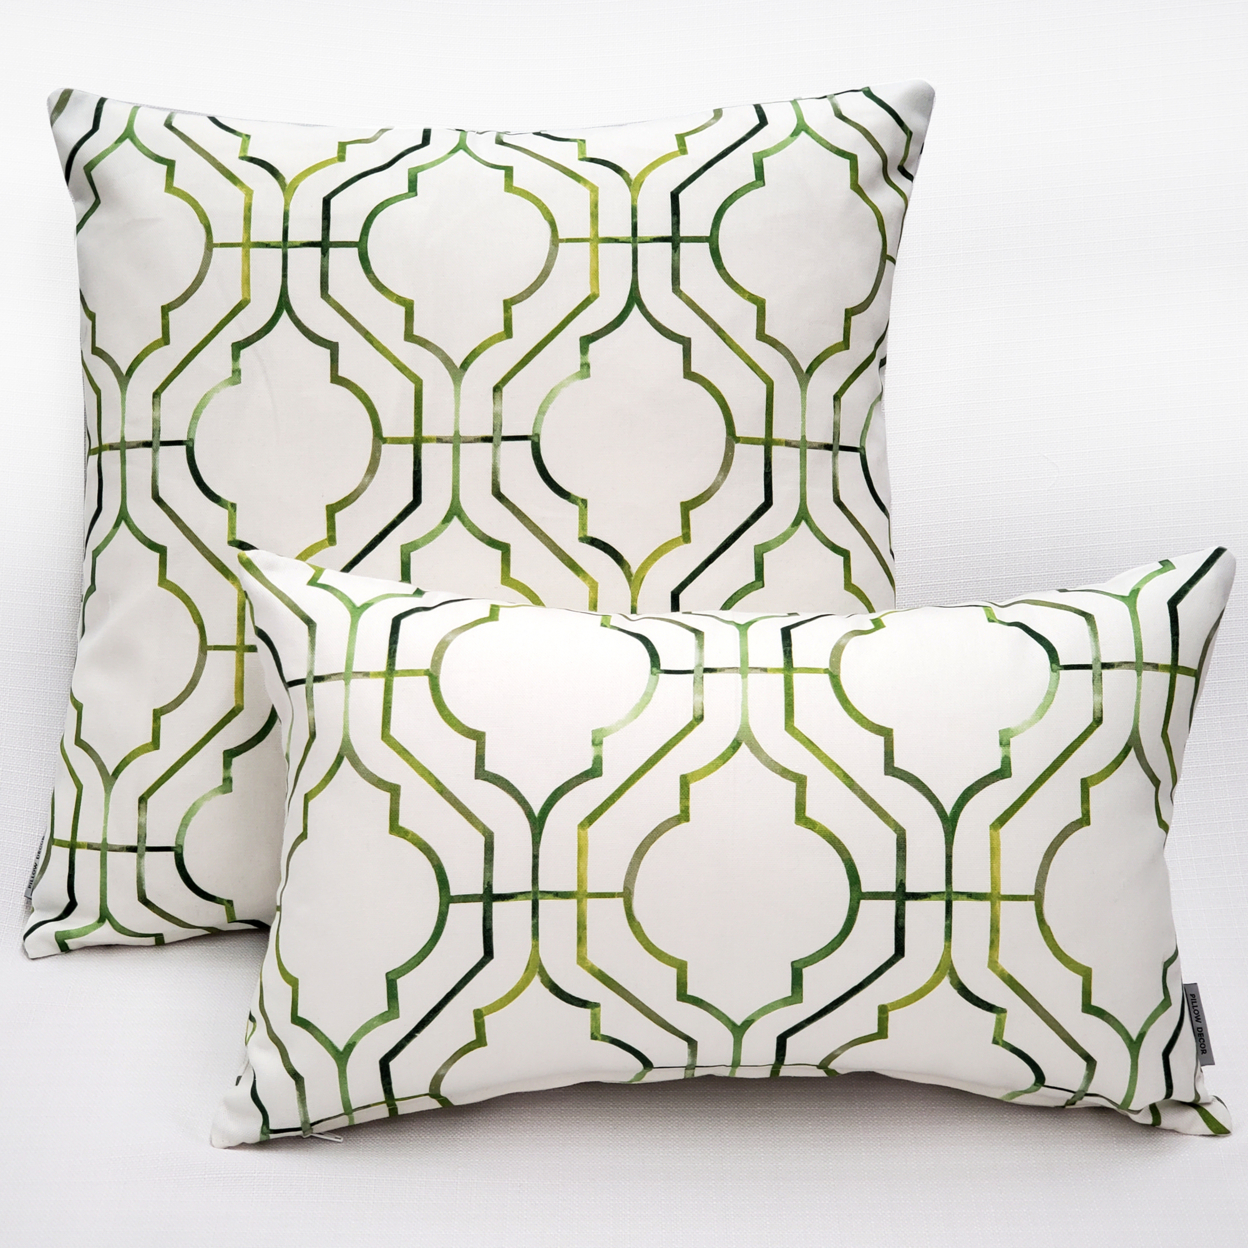 Biltmore Gate Green Throw Pillow 12x20 Inches Square, Complete Pillow With Polyfill Pillow Insert